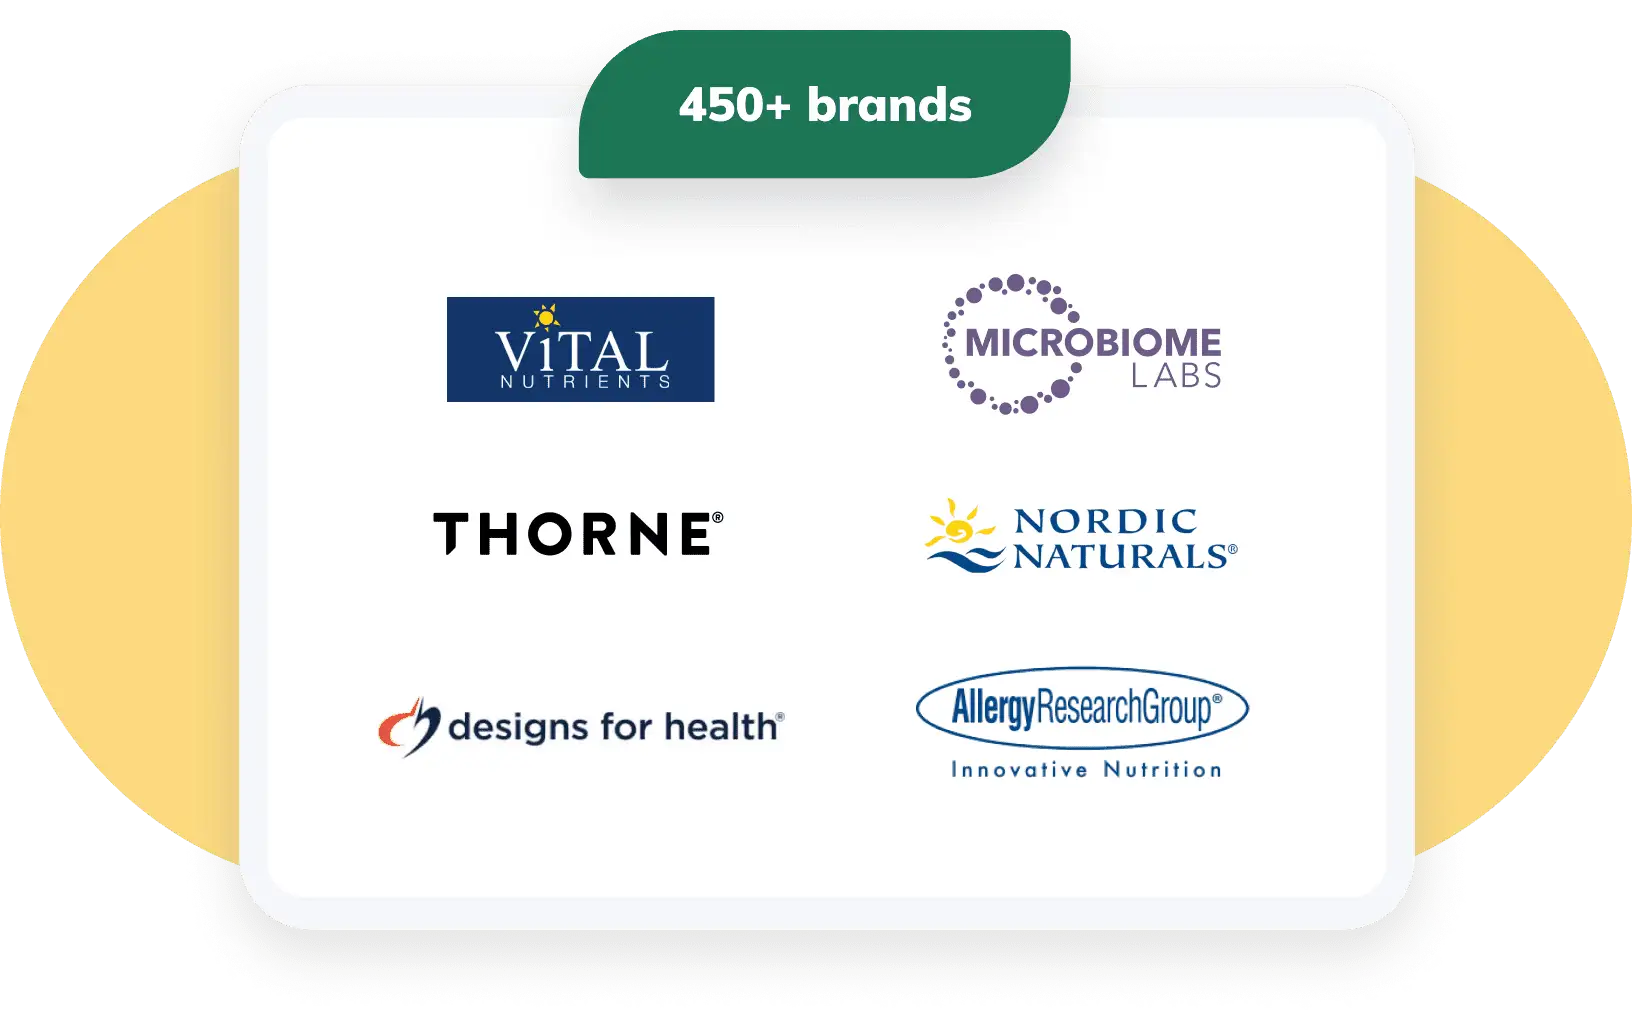 Over 450 brands with the logos for Vital Nutrients, Microbiome Labs, Thorne, Nordic Naturals, Designs for Health and AllergyResearchGroup